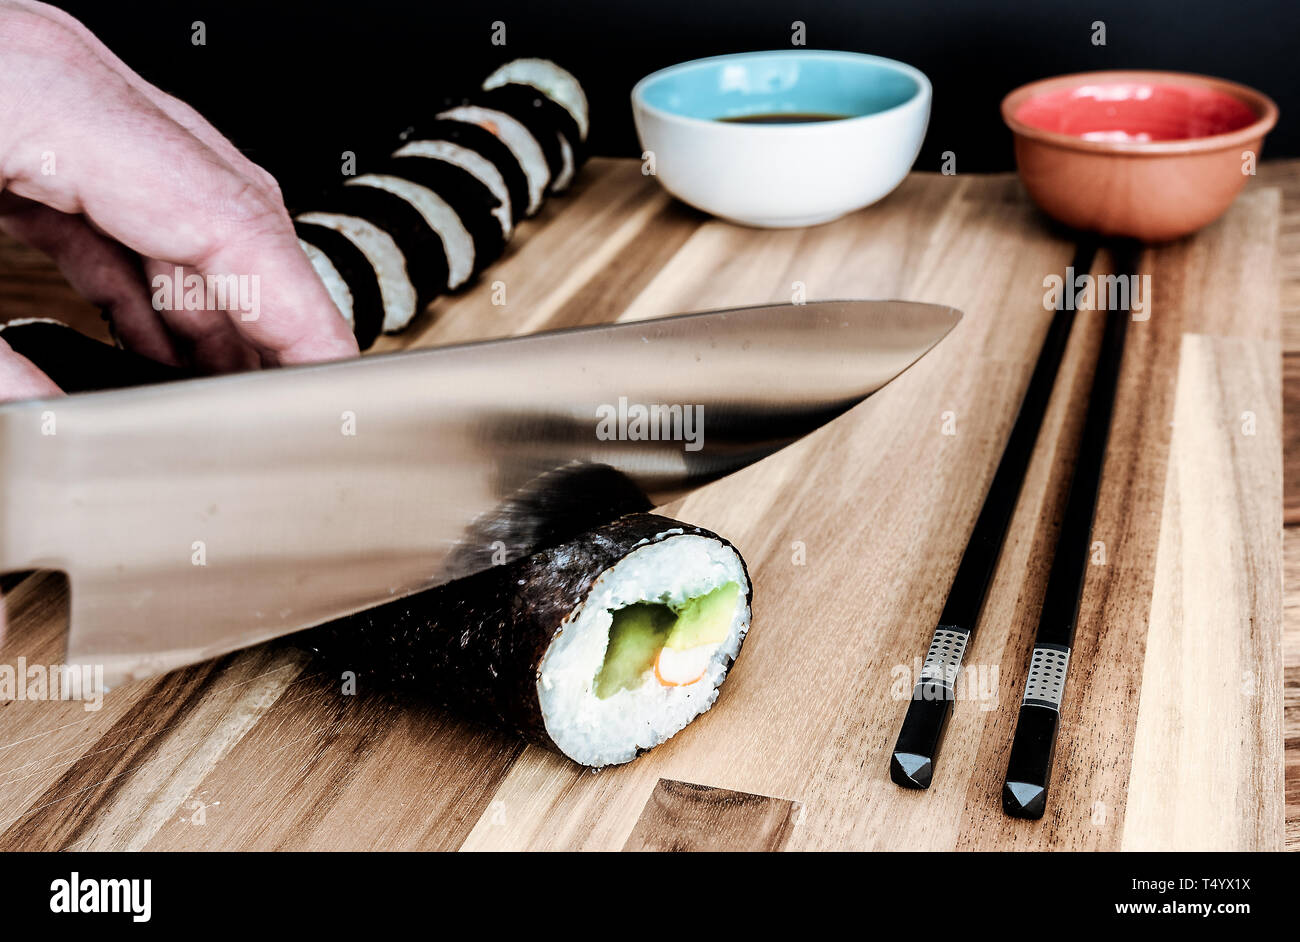 close-up of person cutting homemade sushi rolls with kitchen knife Stock Photo